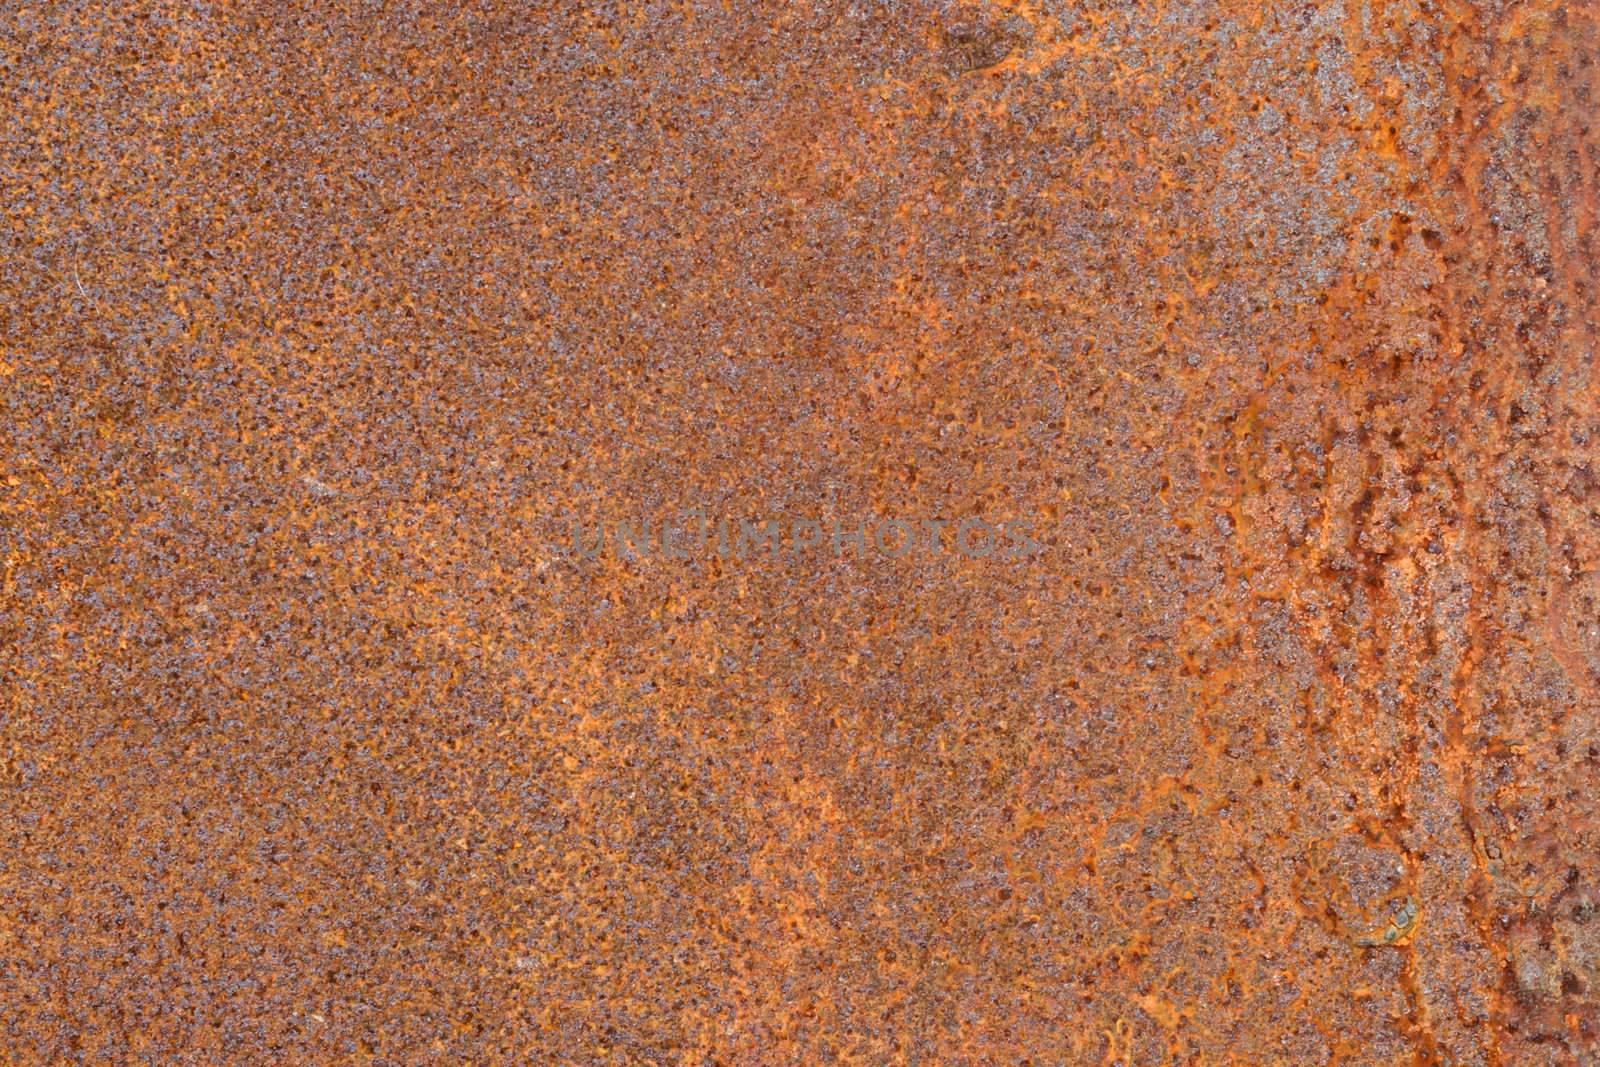 Metal rusty surface by pzaxe